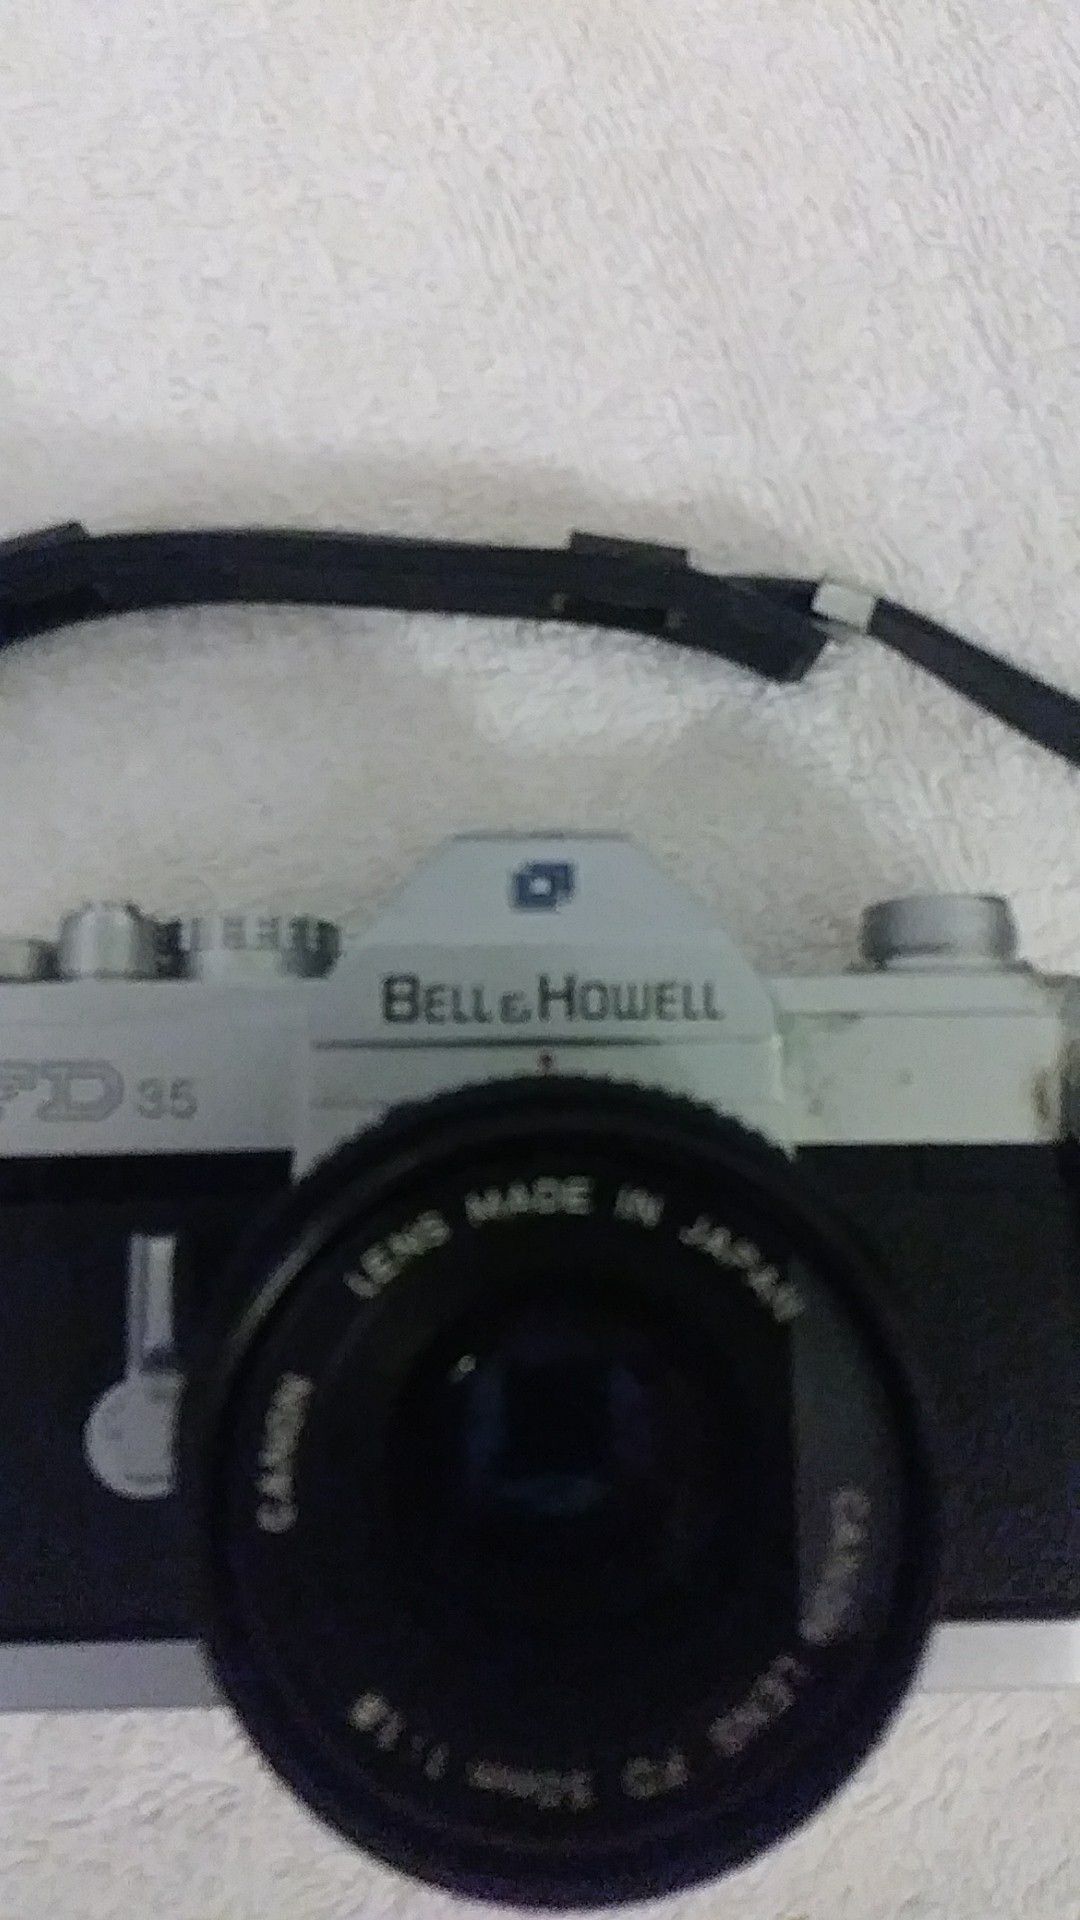 Bell& howell 35mm camera with canon FD 50mm lens good working condition no case has some wear sold as is pick up only